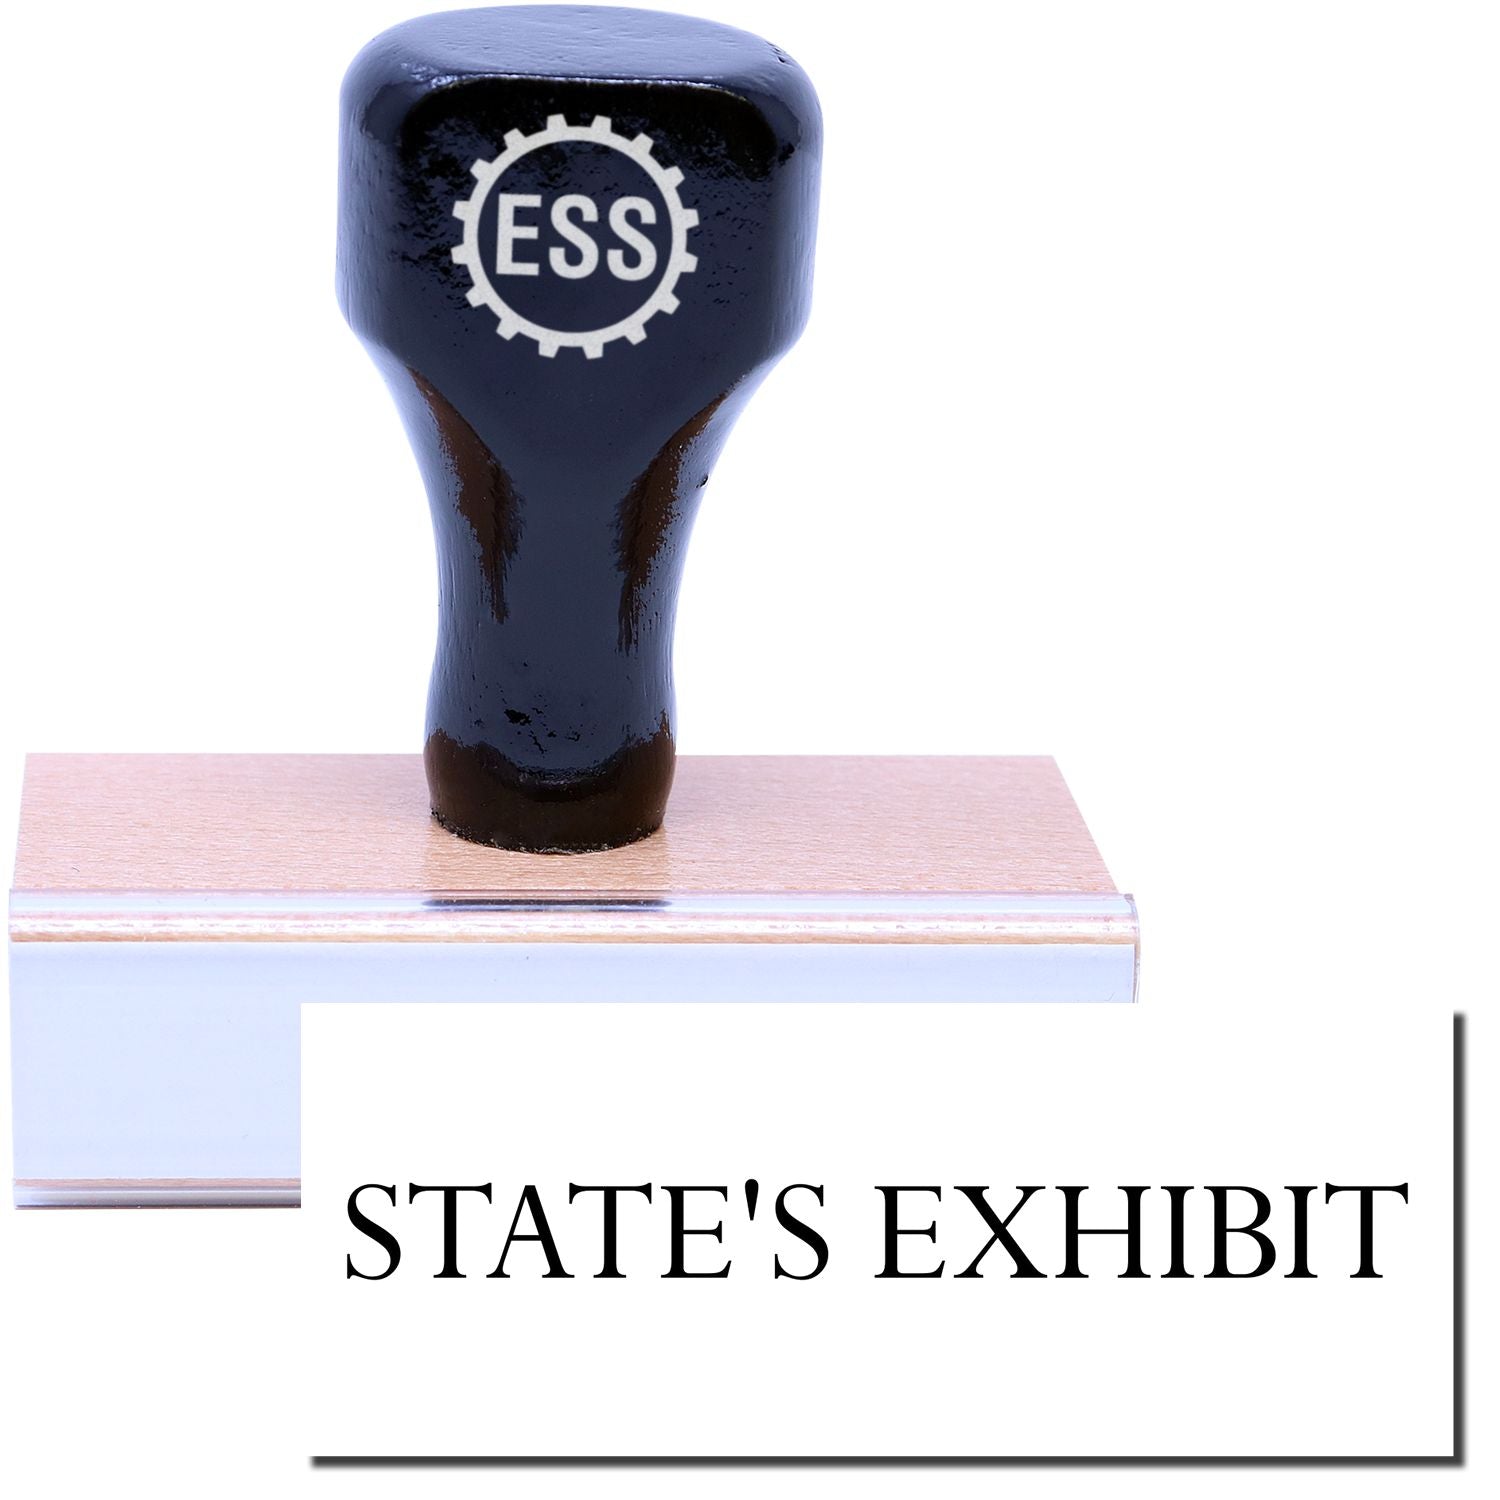 A stock office rubber stamp with a stamped image showing how the text "STATE'S EXHIBIT" in a large font is displayed after stamping.